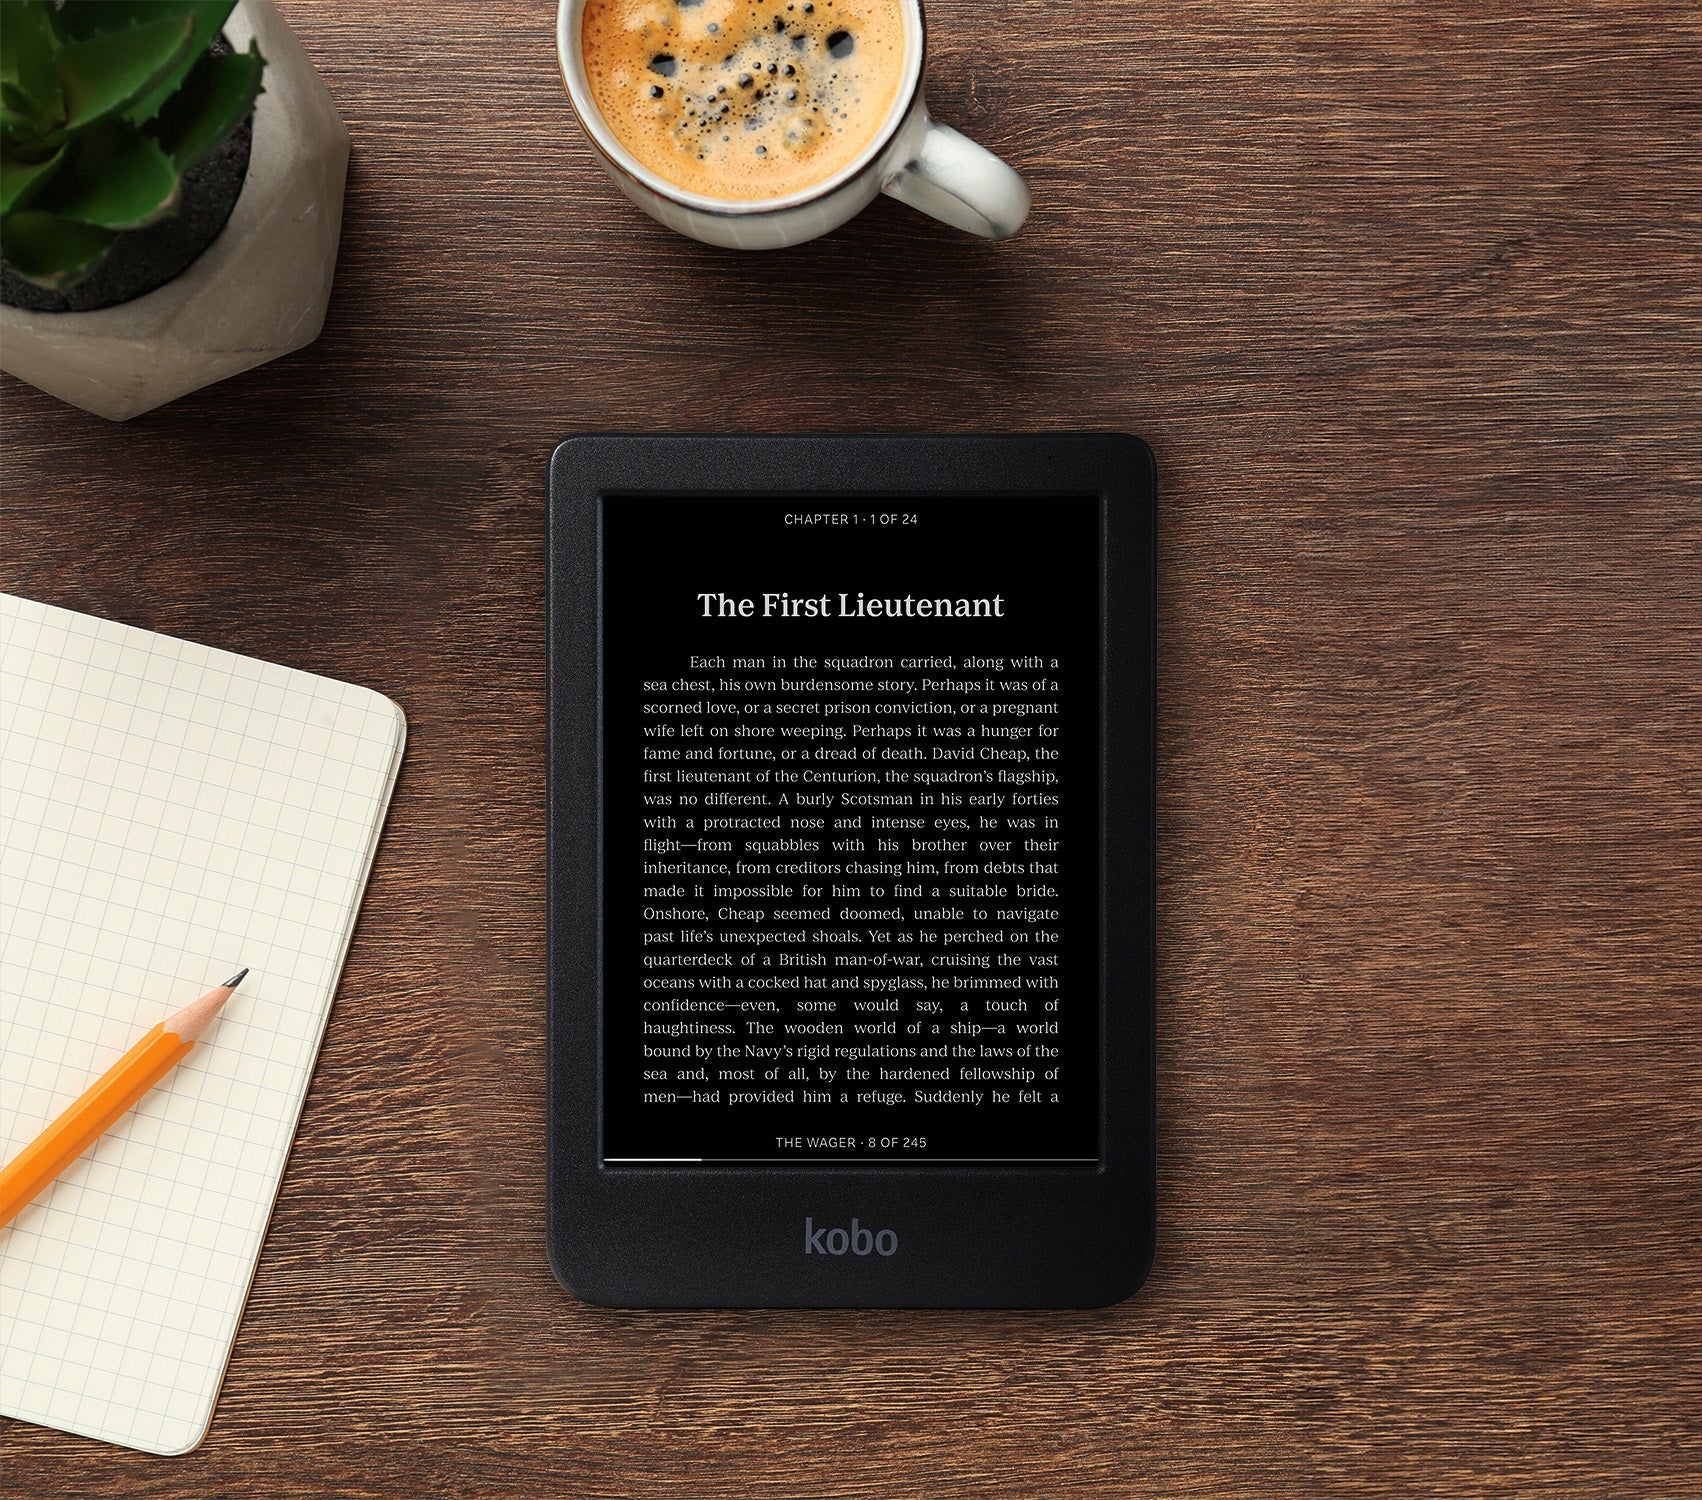 A Kobo Clara BW eReader set on a table, showing Dark Mode on the left side of the screen, and the standard reading experience on the right.